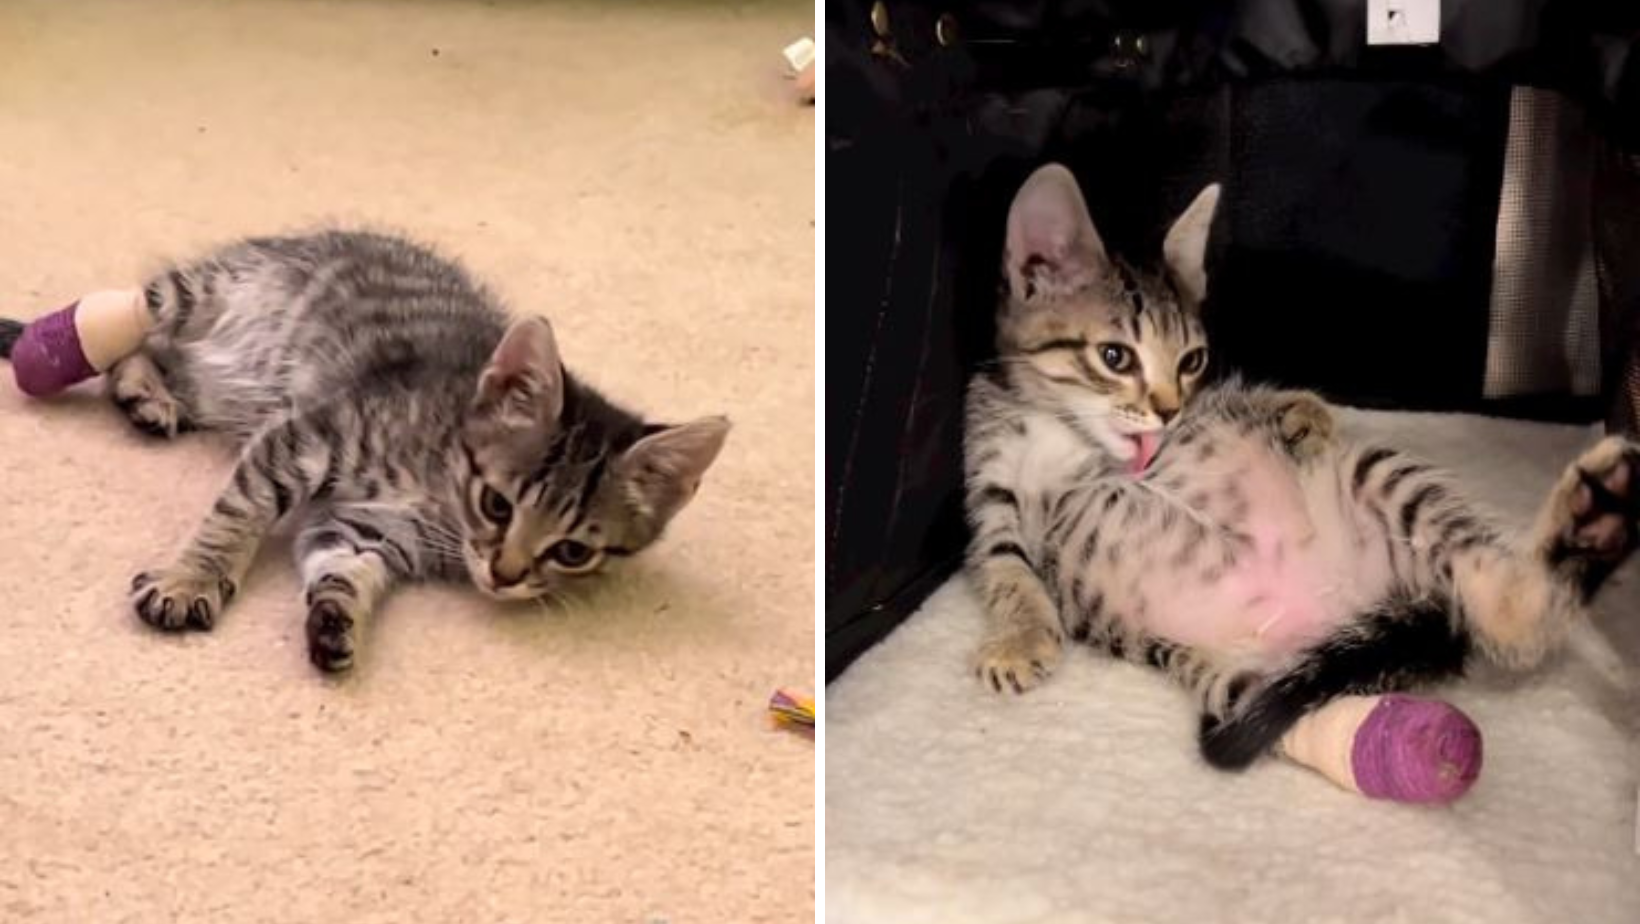 This Kitten Rescue Lost A Part Of Her Leg While Hiding In A Car Engine